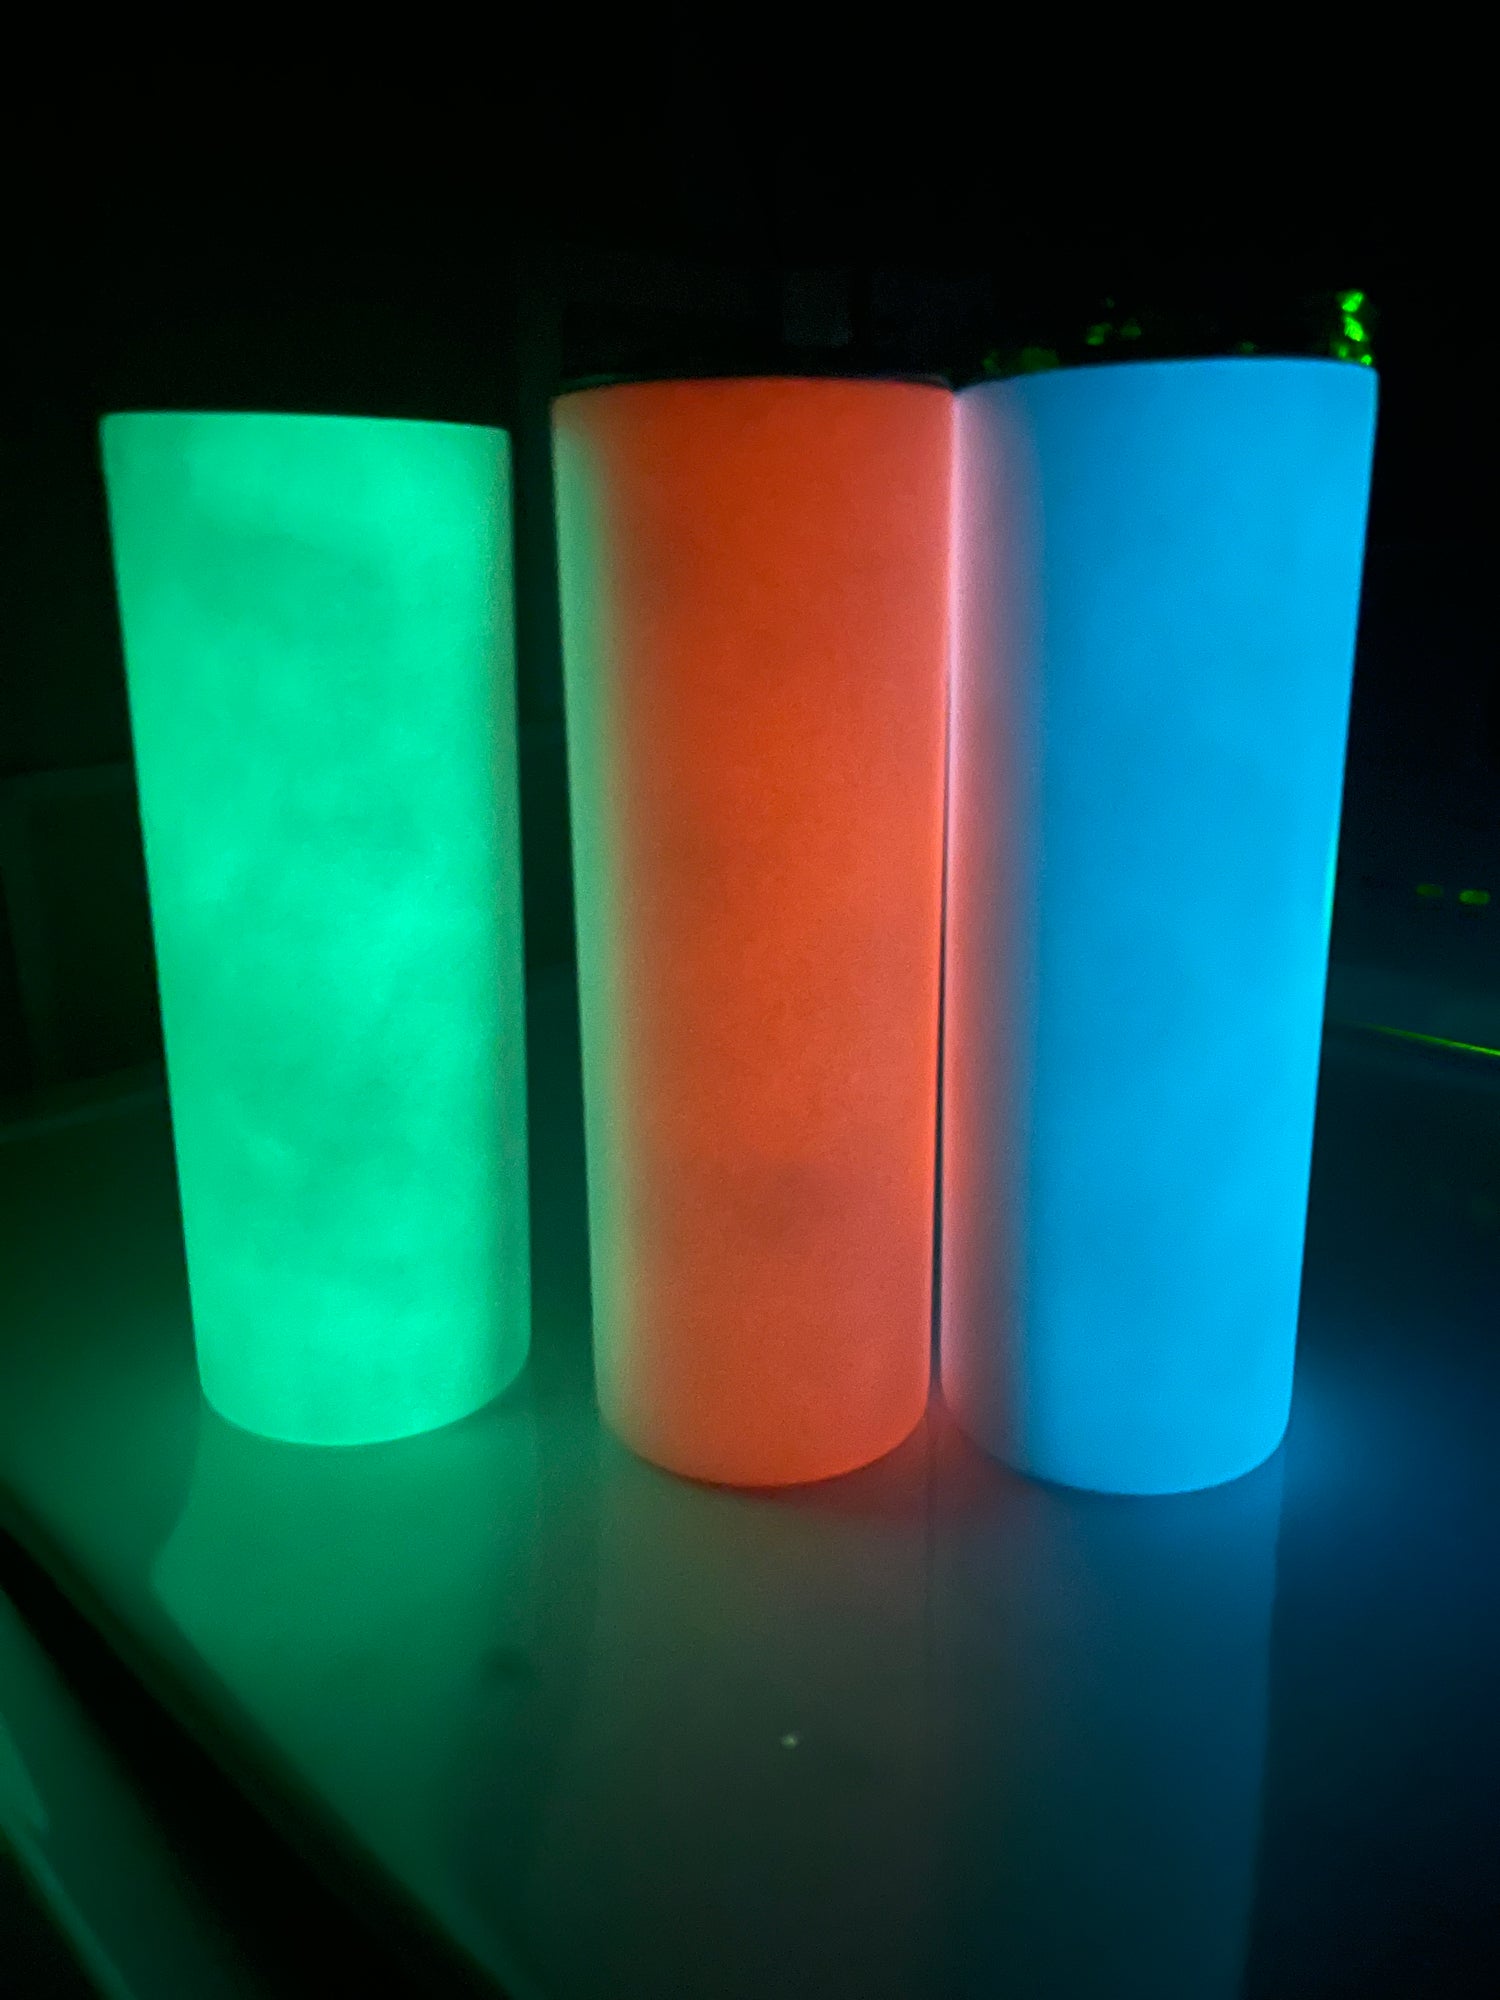 Glow in the dark cups in your choice of green, blue, or red/orange with  your choice of design